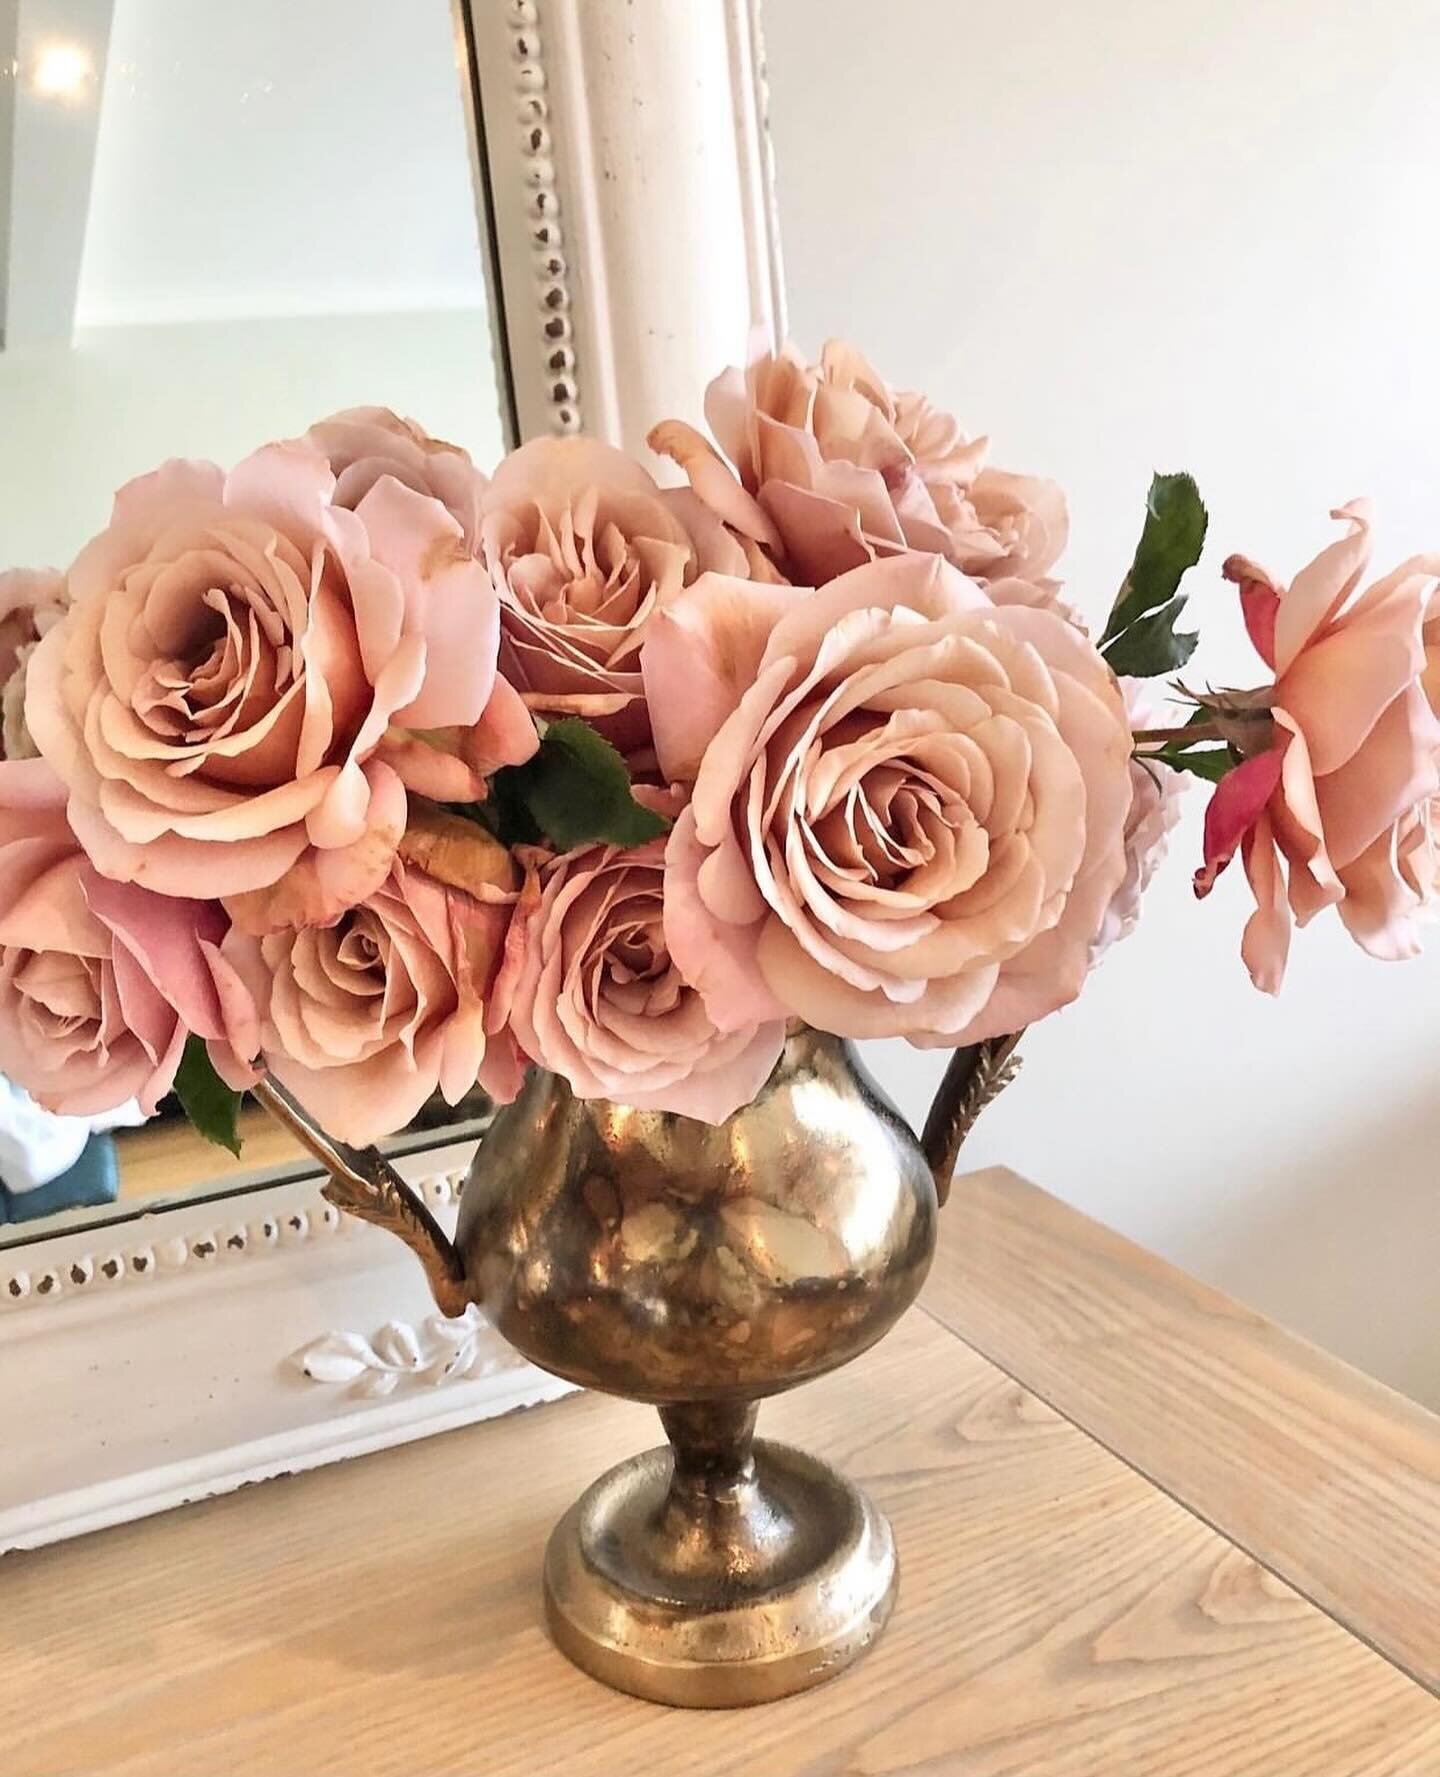 Thought you could use these this Monday morning! A favorite of mine&hellip;. koko loko roses. Hope you have the best week!